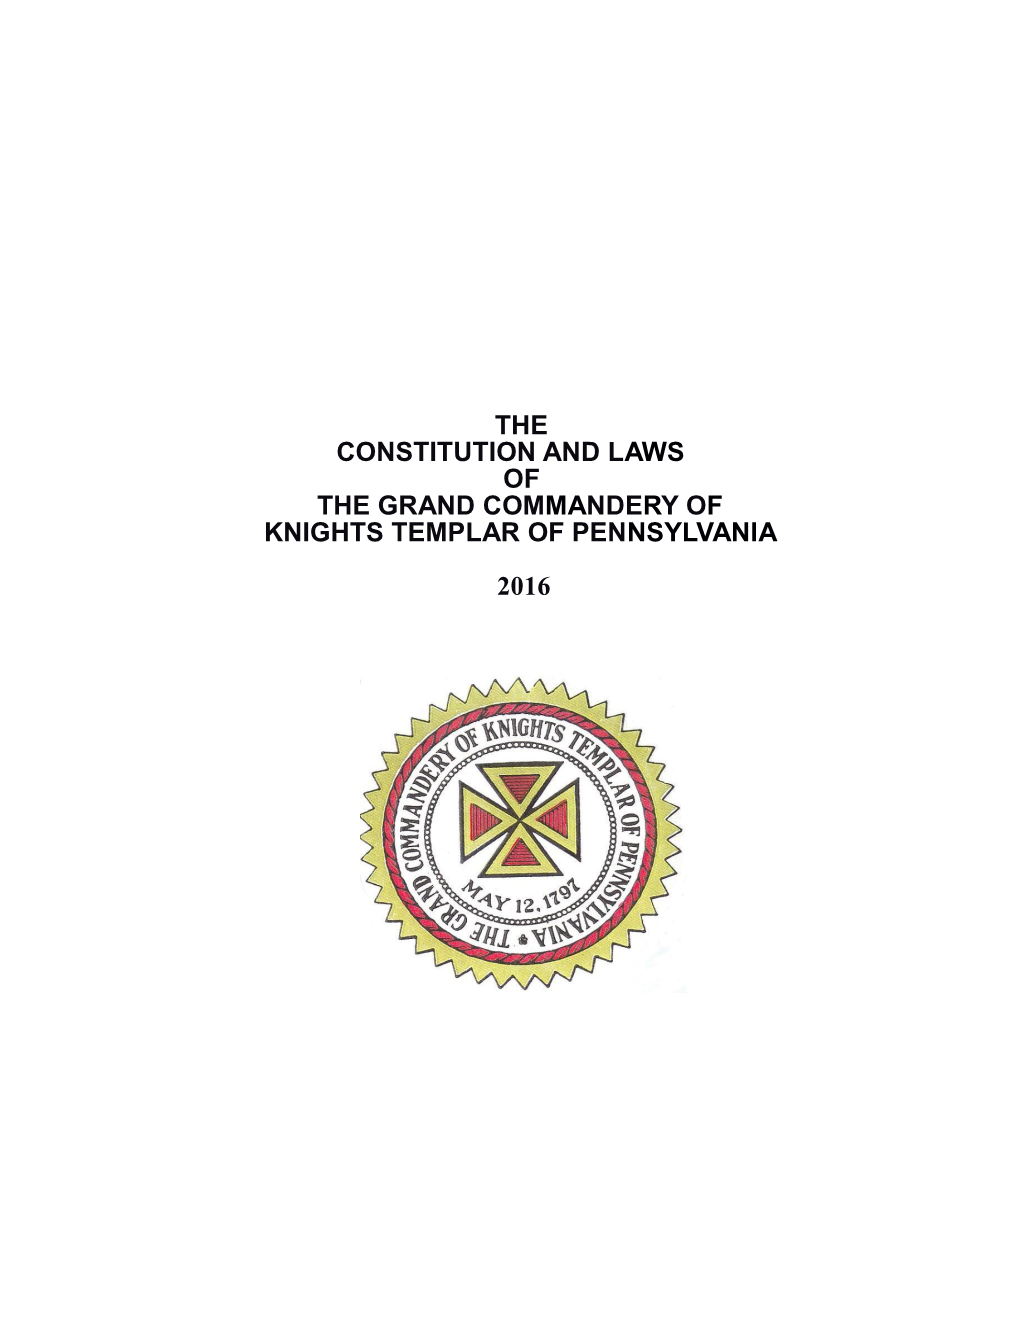 The Constitution and Laws of the Grand Commandery of Knights Templar of Pennsylvania